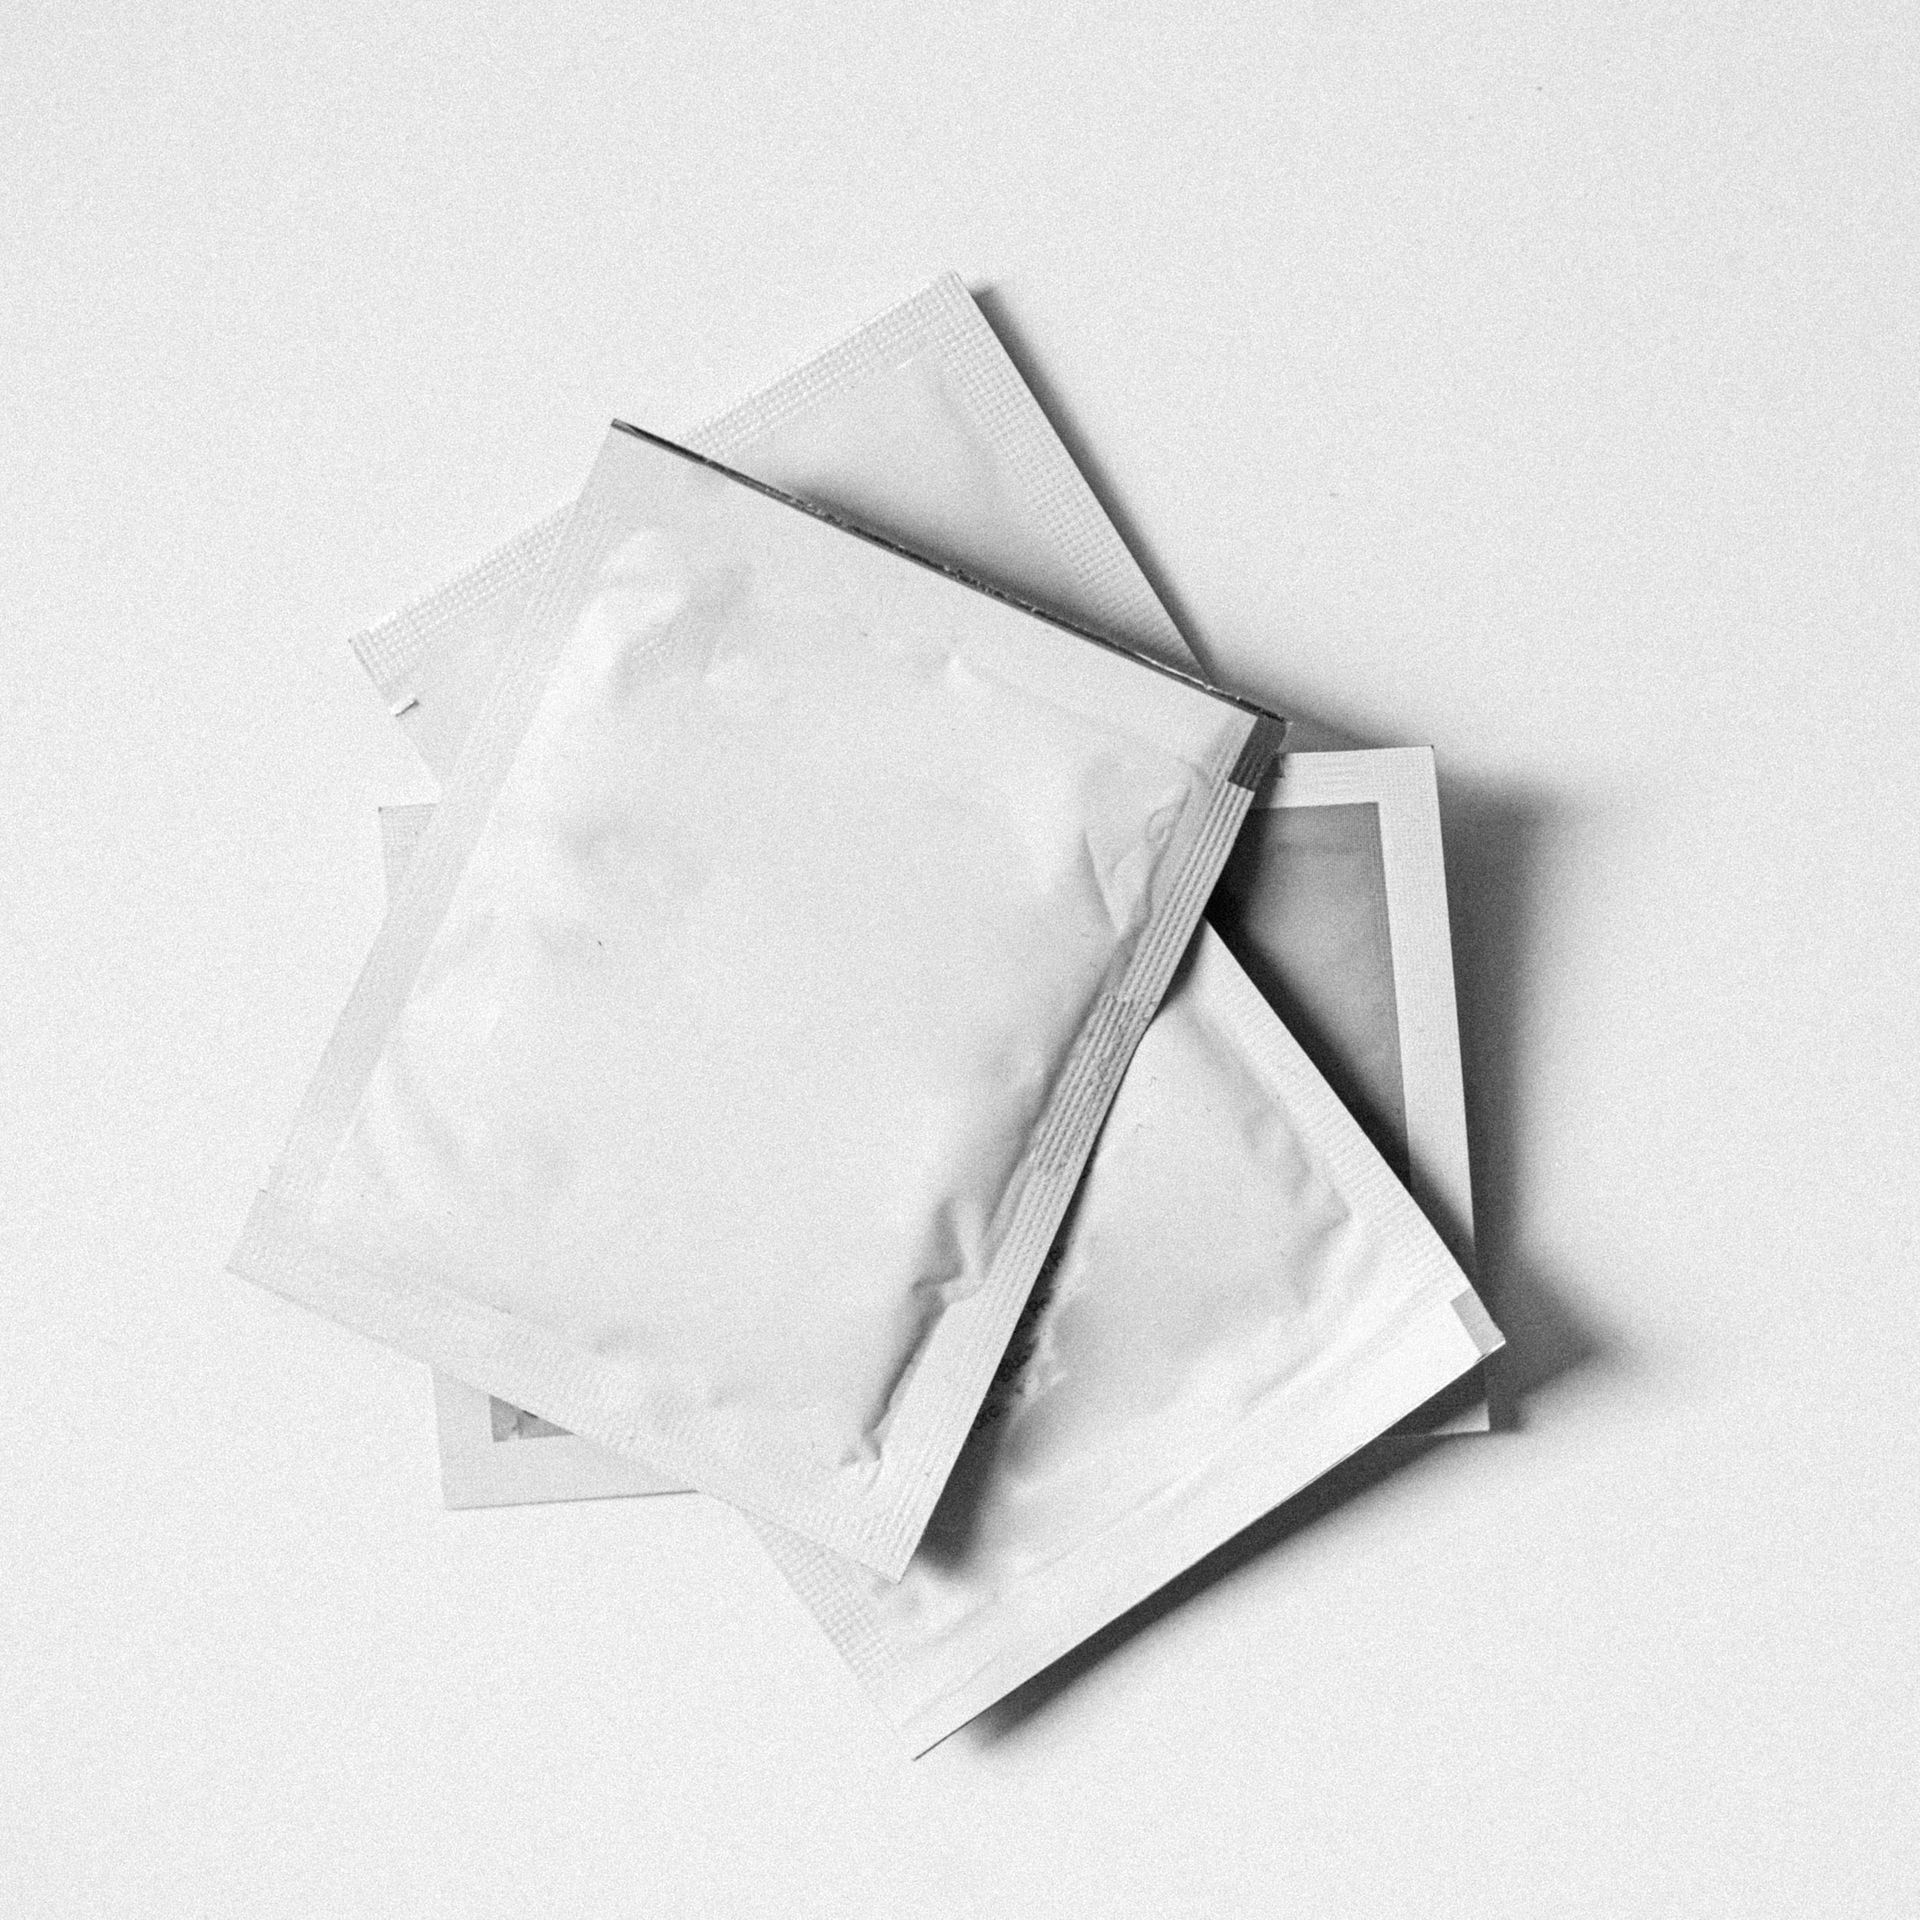 three white envelopes are stacked on top of each other on a white surface .